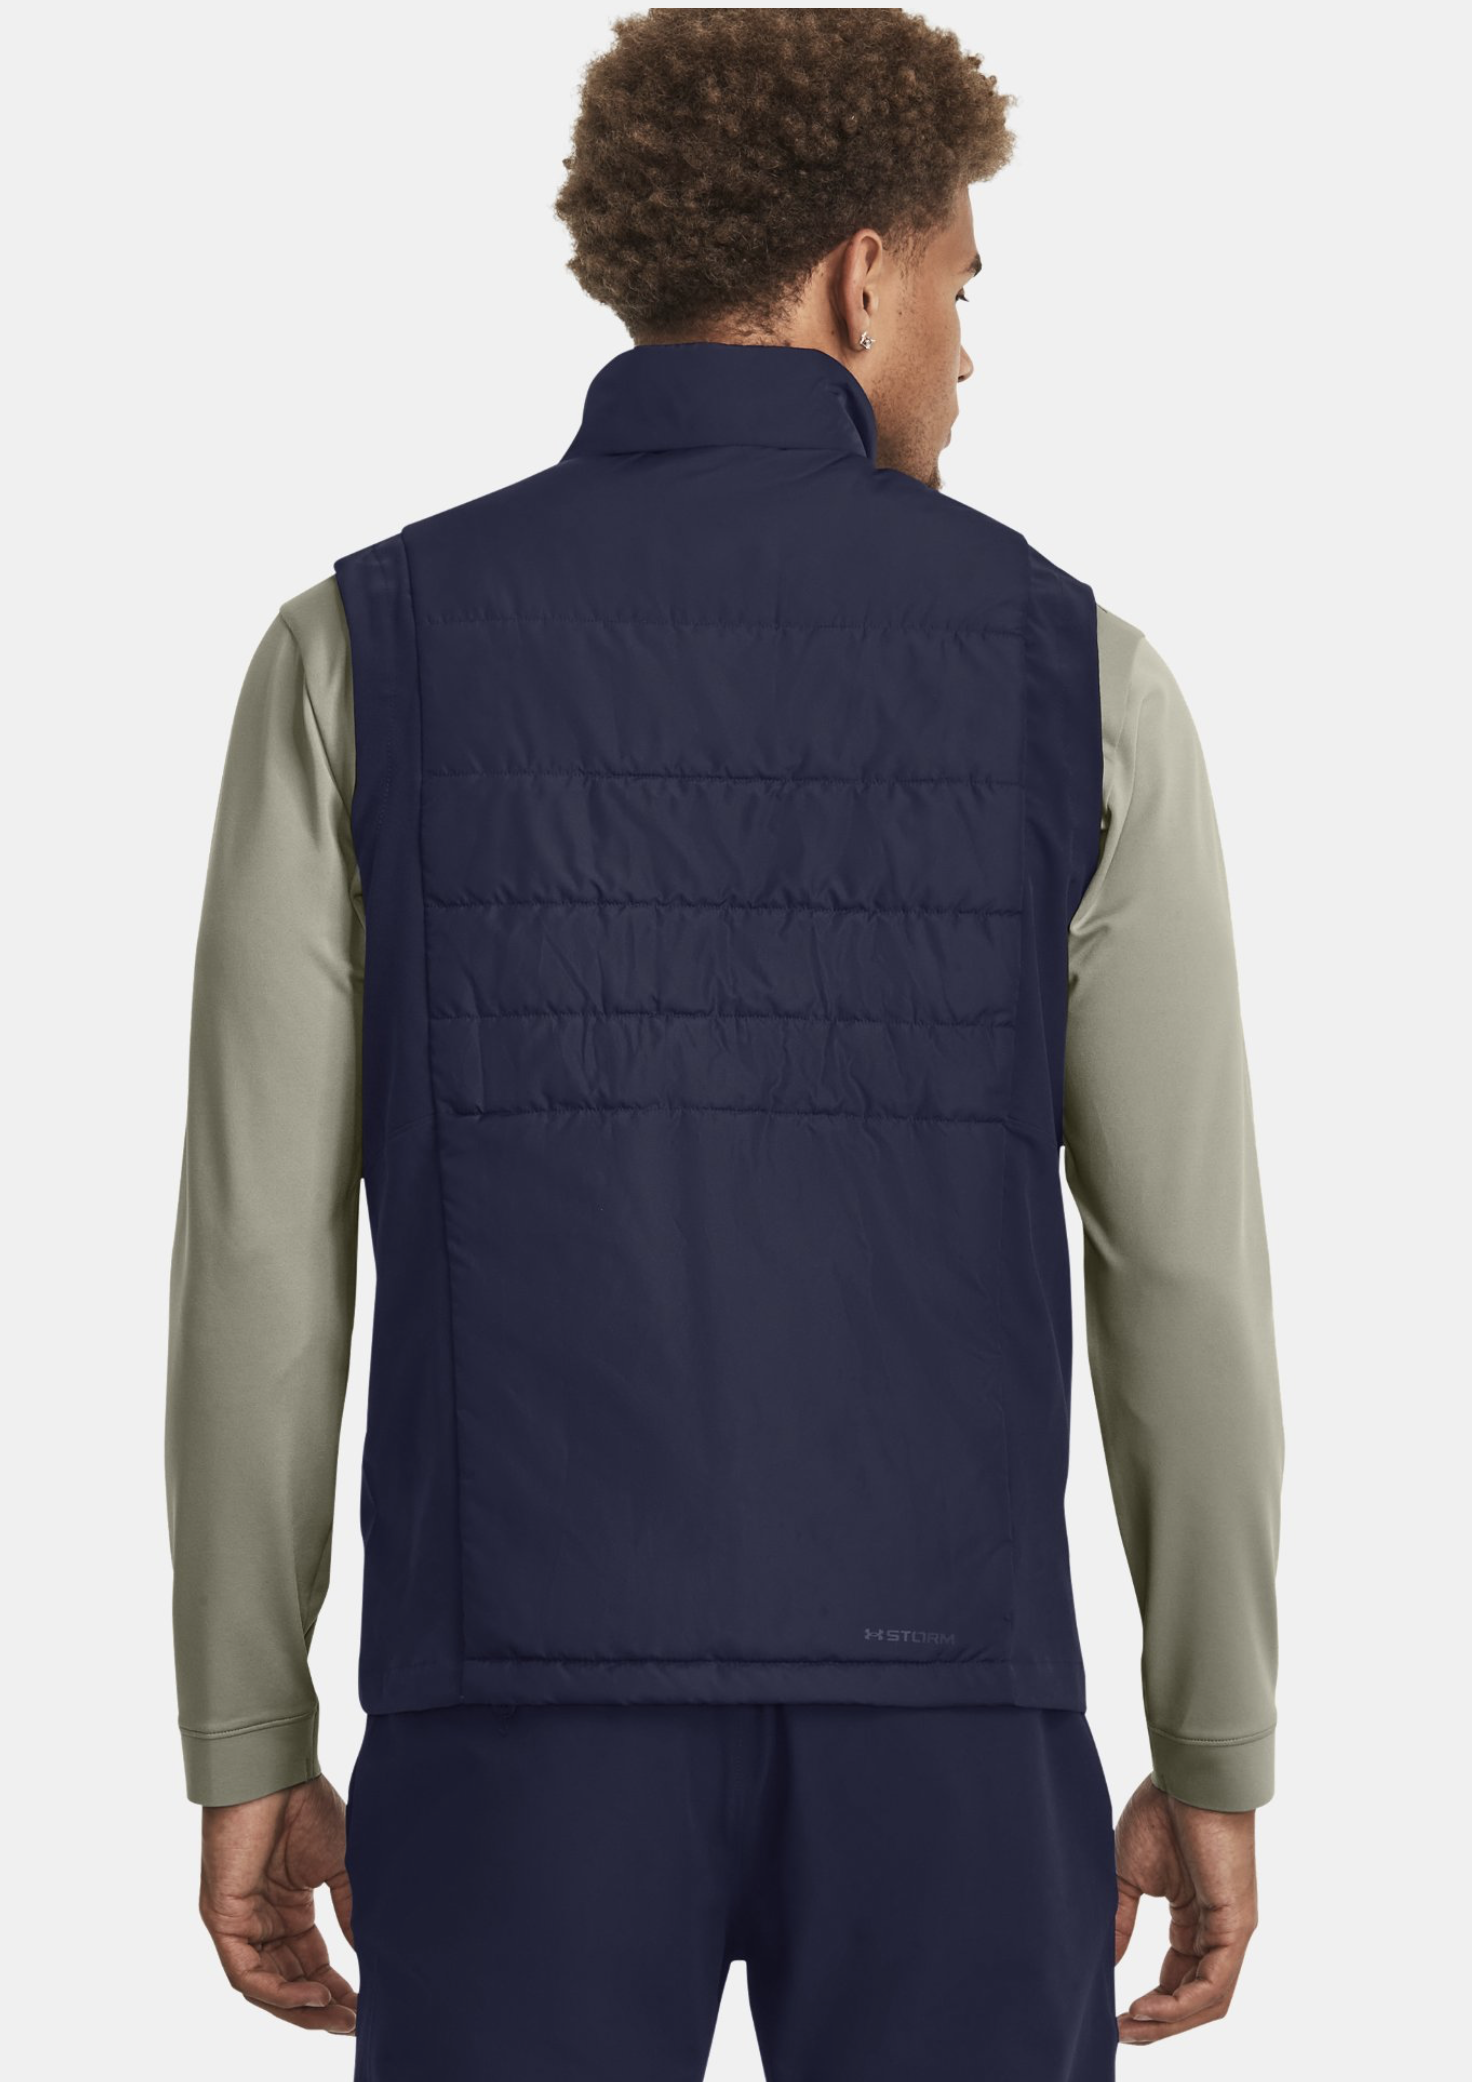 Under Armour | 1378497-410 | Storm Session Golf Vest | Midnight Navy / Pitch Gray